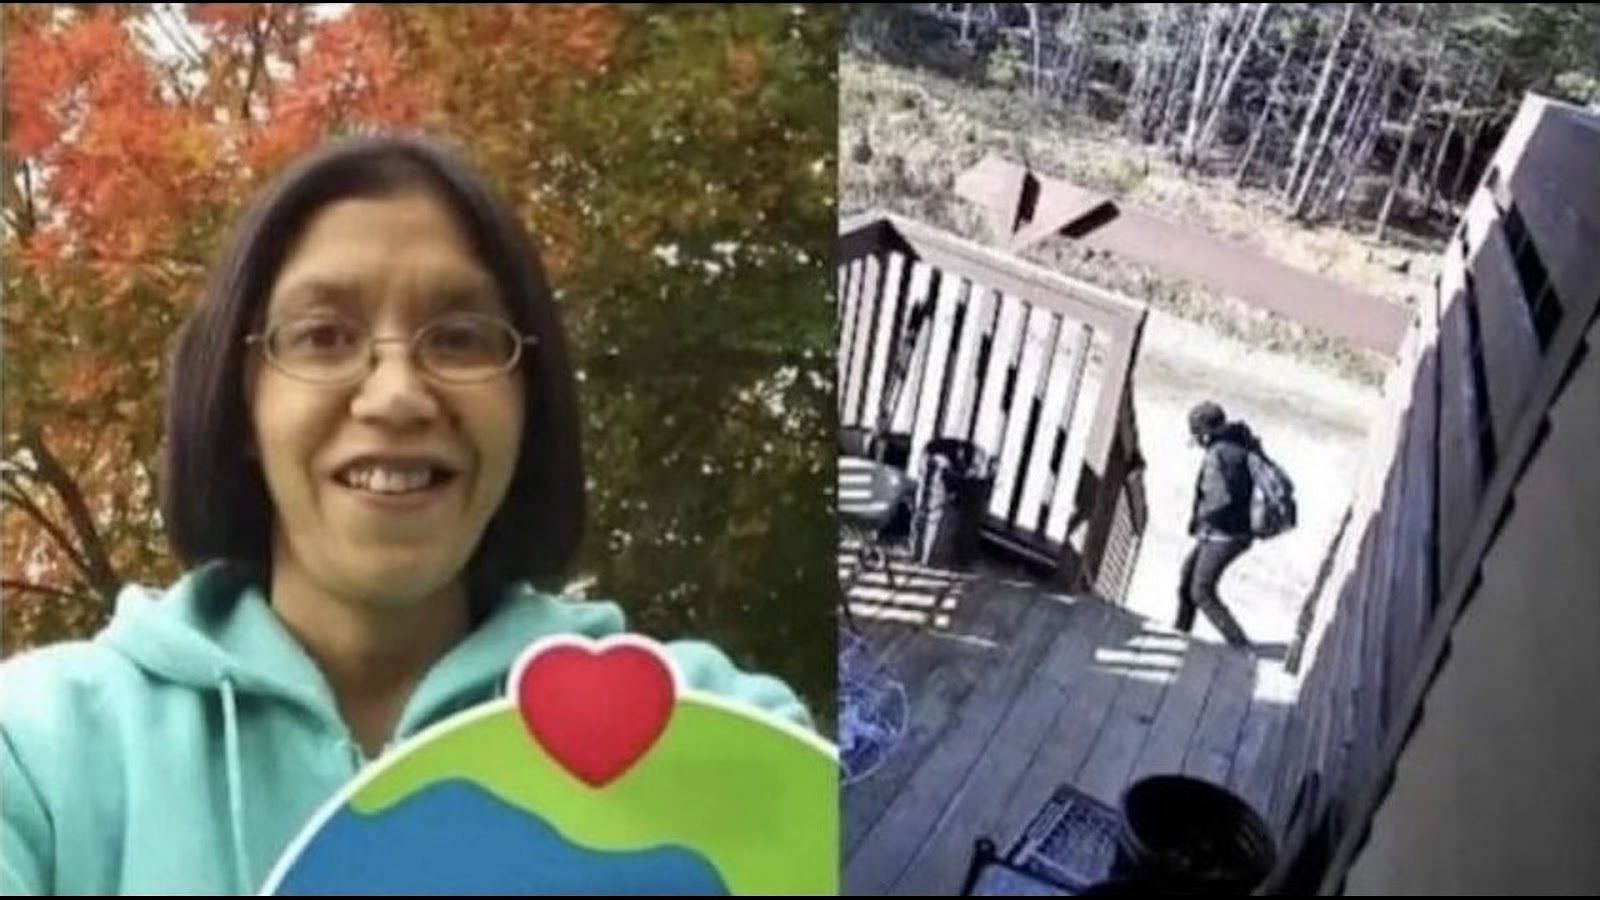 Kimberly Neptune and the screenshot of the suspect caught on a surveillance camera (Images via Kimberly Neptune/Facebook and Maine State Police)